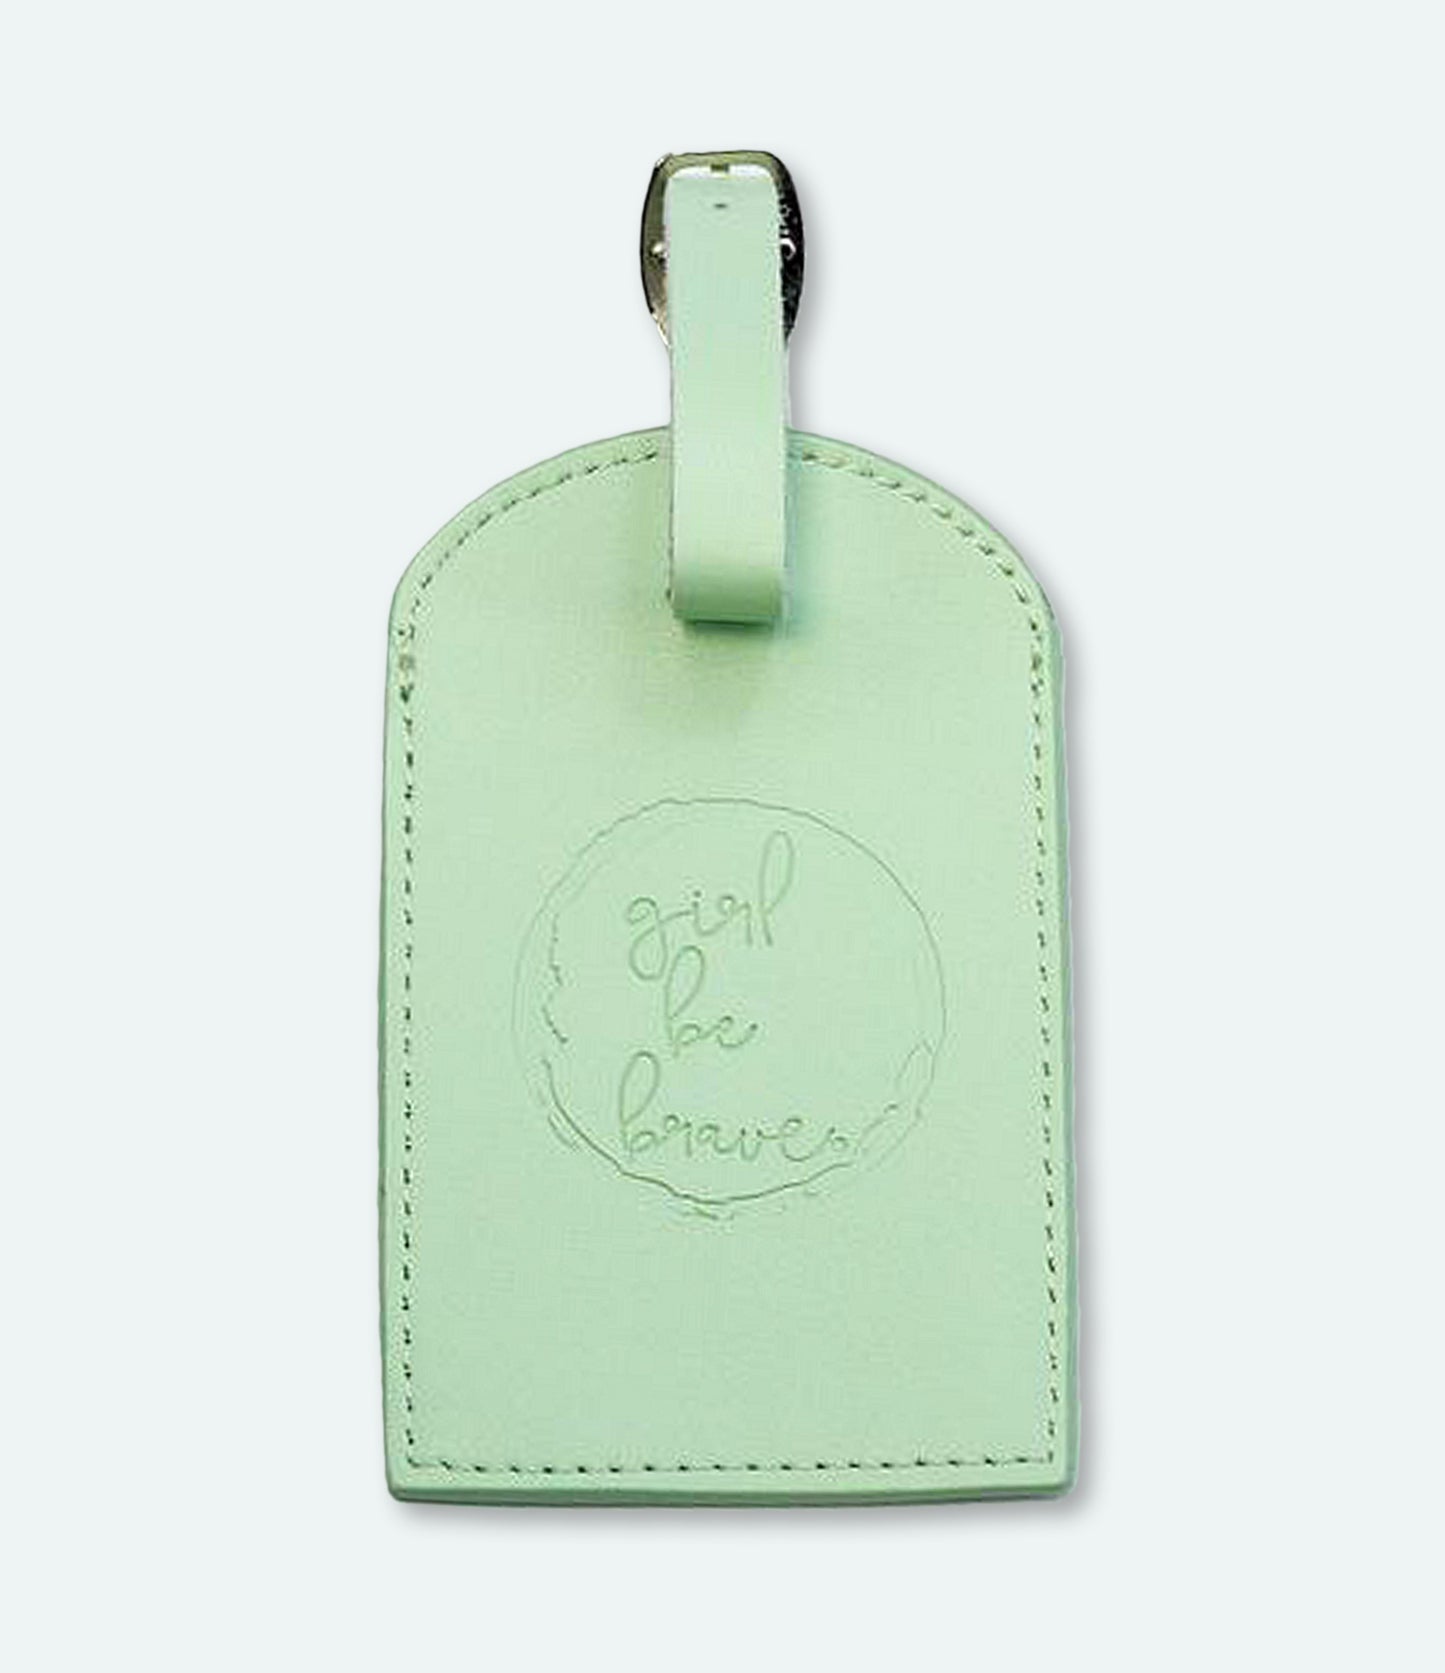 Girl Be Brave Genuine Leather Embossed Luggage Tag